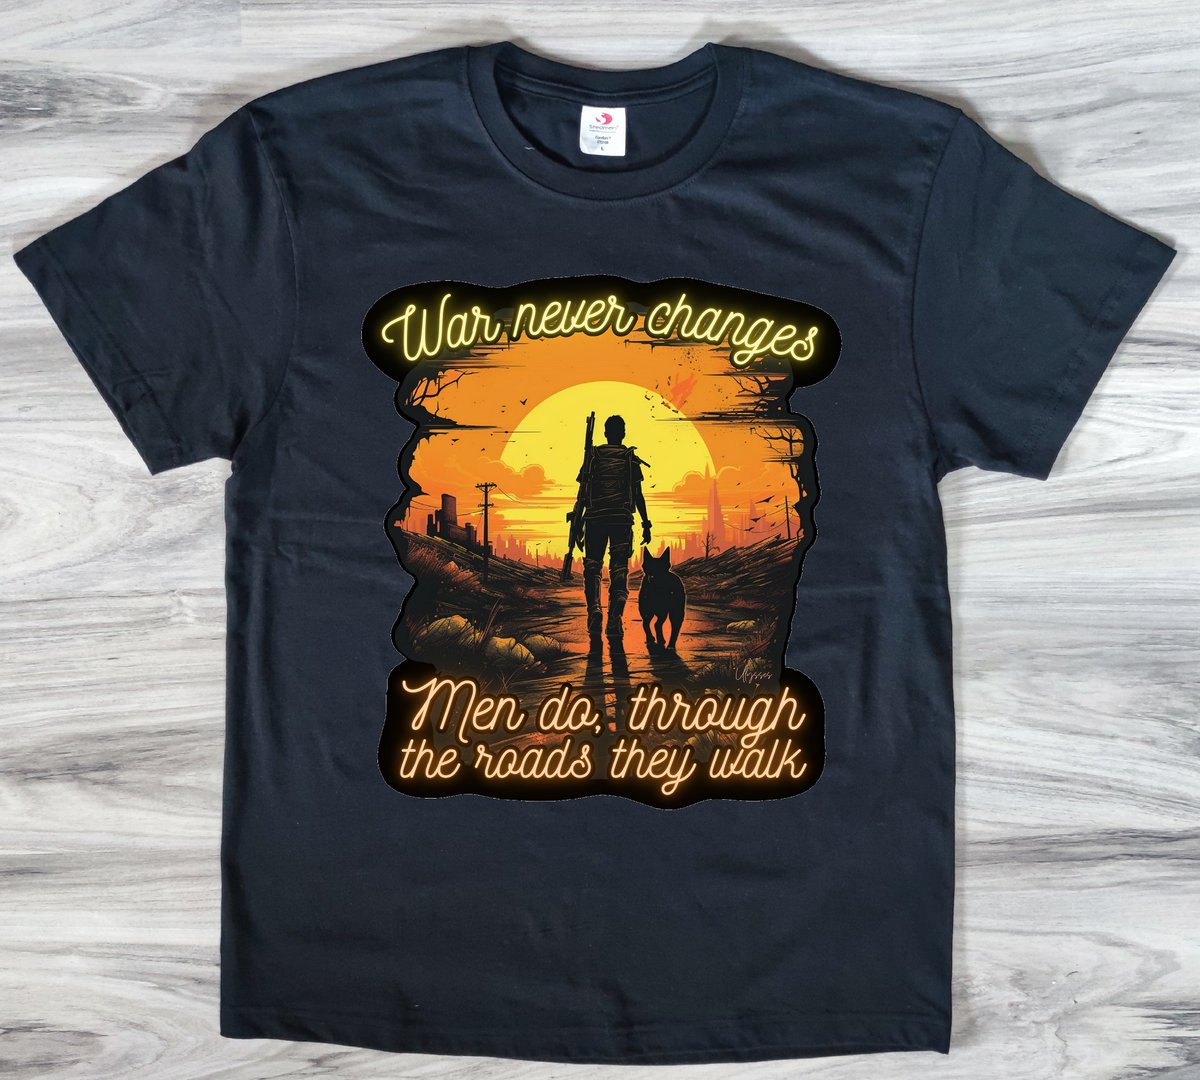 Excited to share the latest addition to my #etsy shop: War Never Changes Original Design Graphic Tee feat. Lone Wanderer and Dogmeat - etsy.me/3QJZgzb

#black #streetwear #shortsleeve #crew #organiccotton #lonewanderer #graphictee #fanart #creativedesign #Fallout